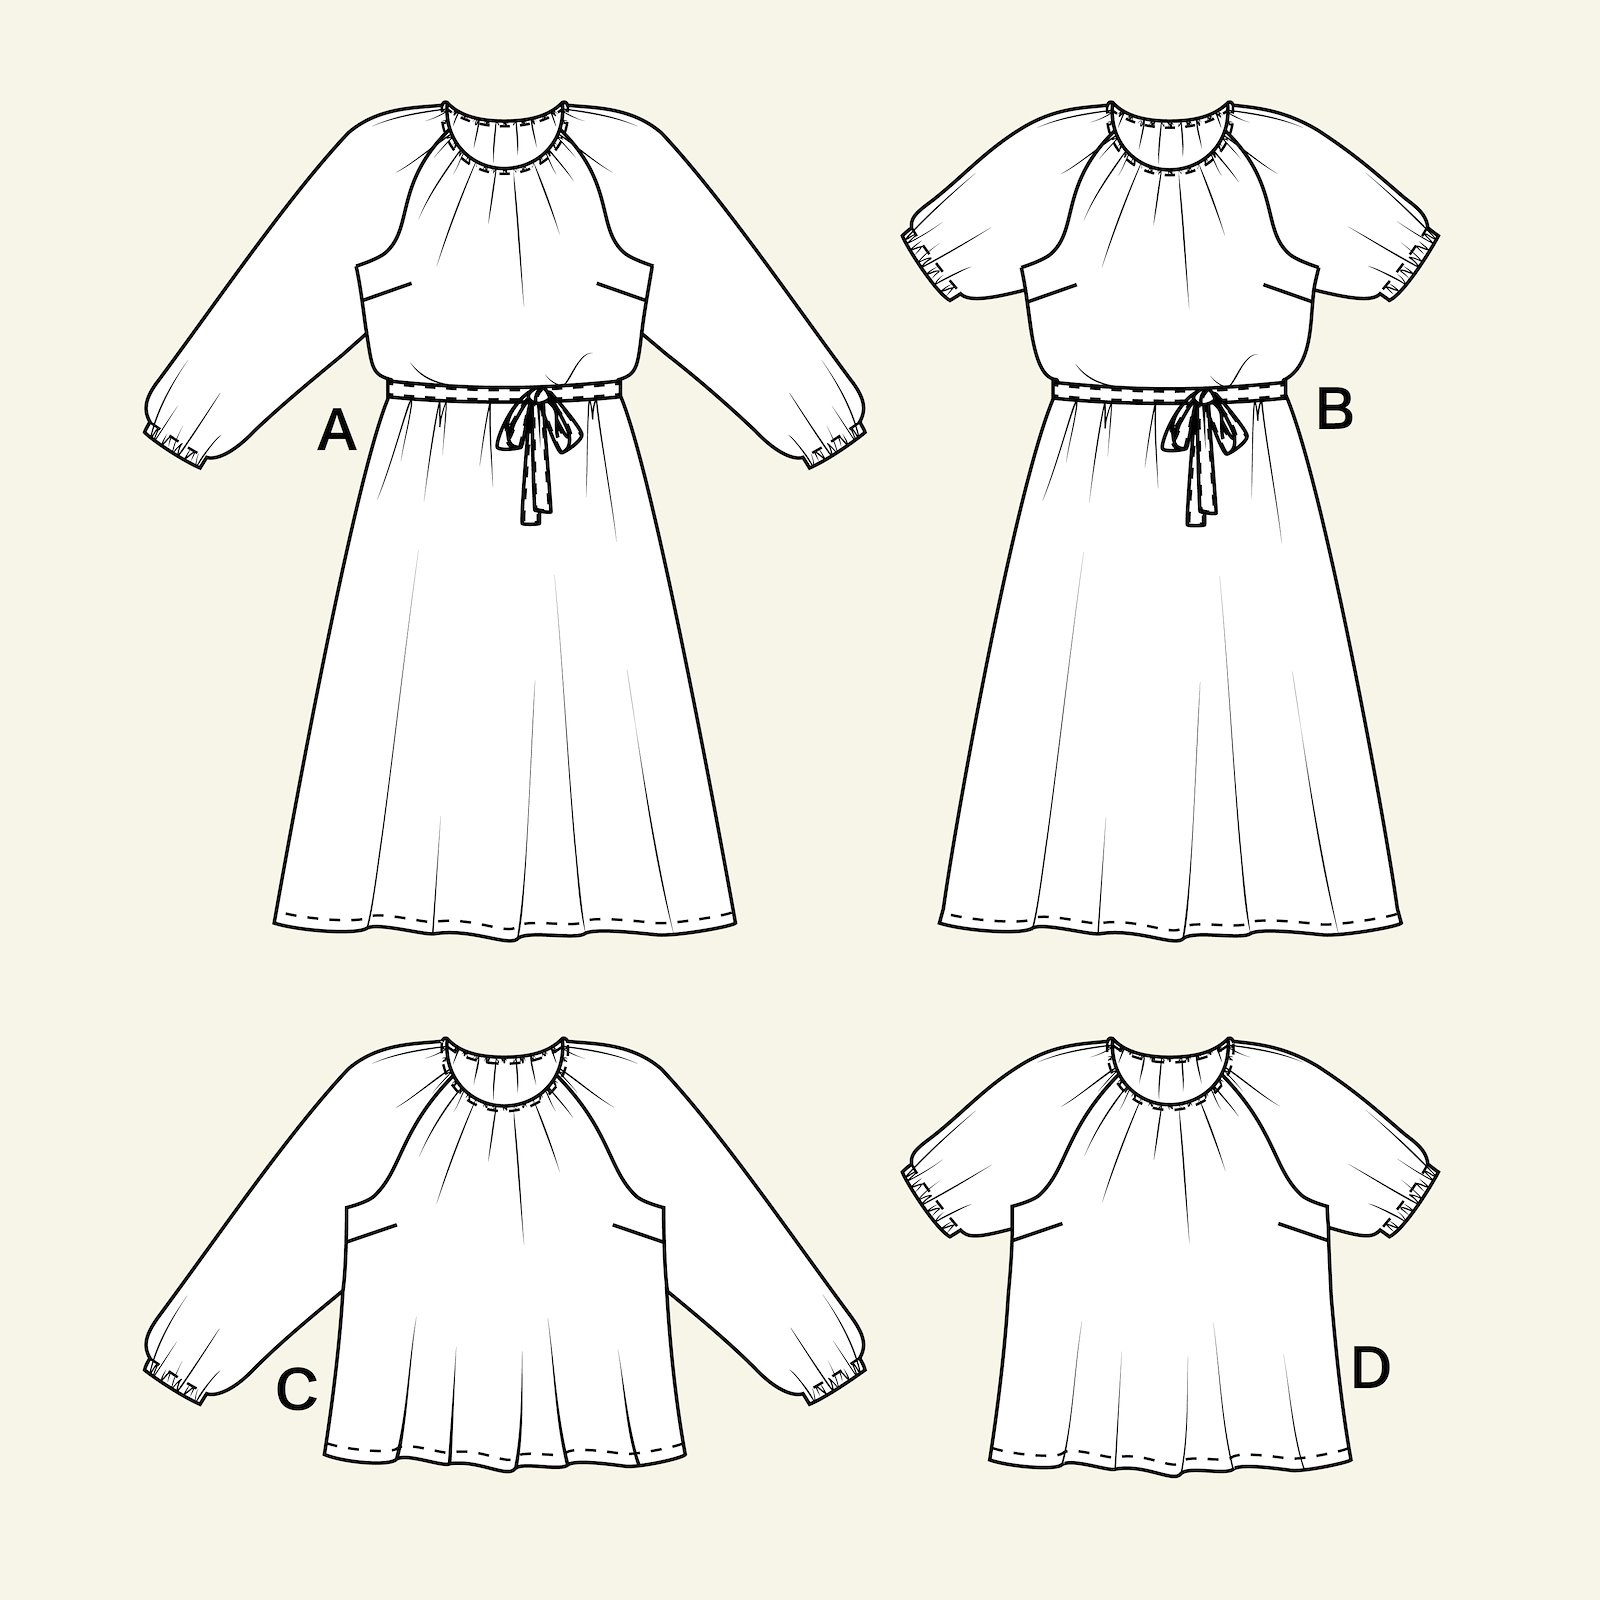 Dress with belt and blouse, 42/14 p23167000_p23167001_p23167002_p23167003_p23167004_pack_b.png